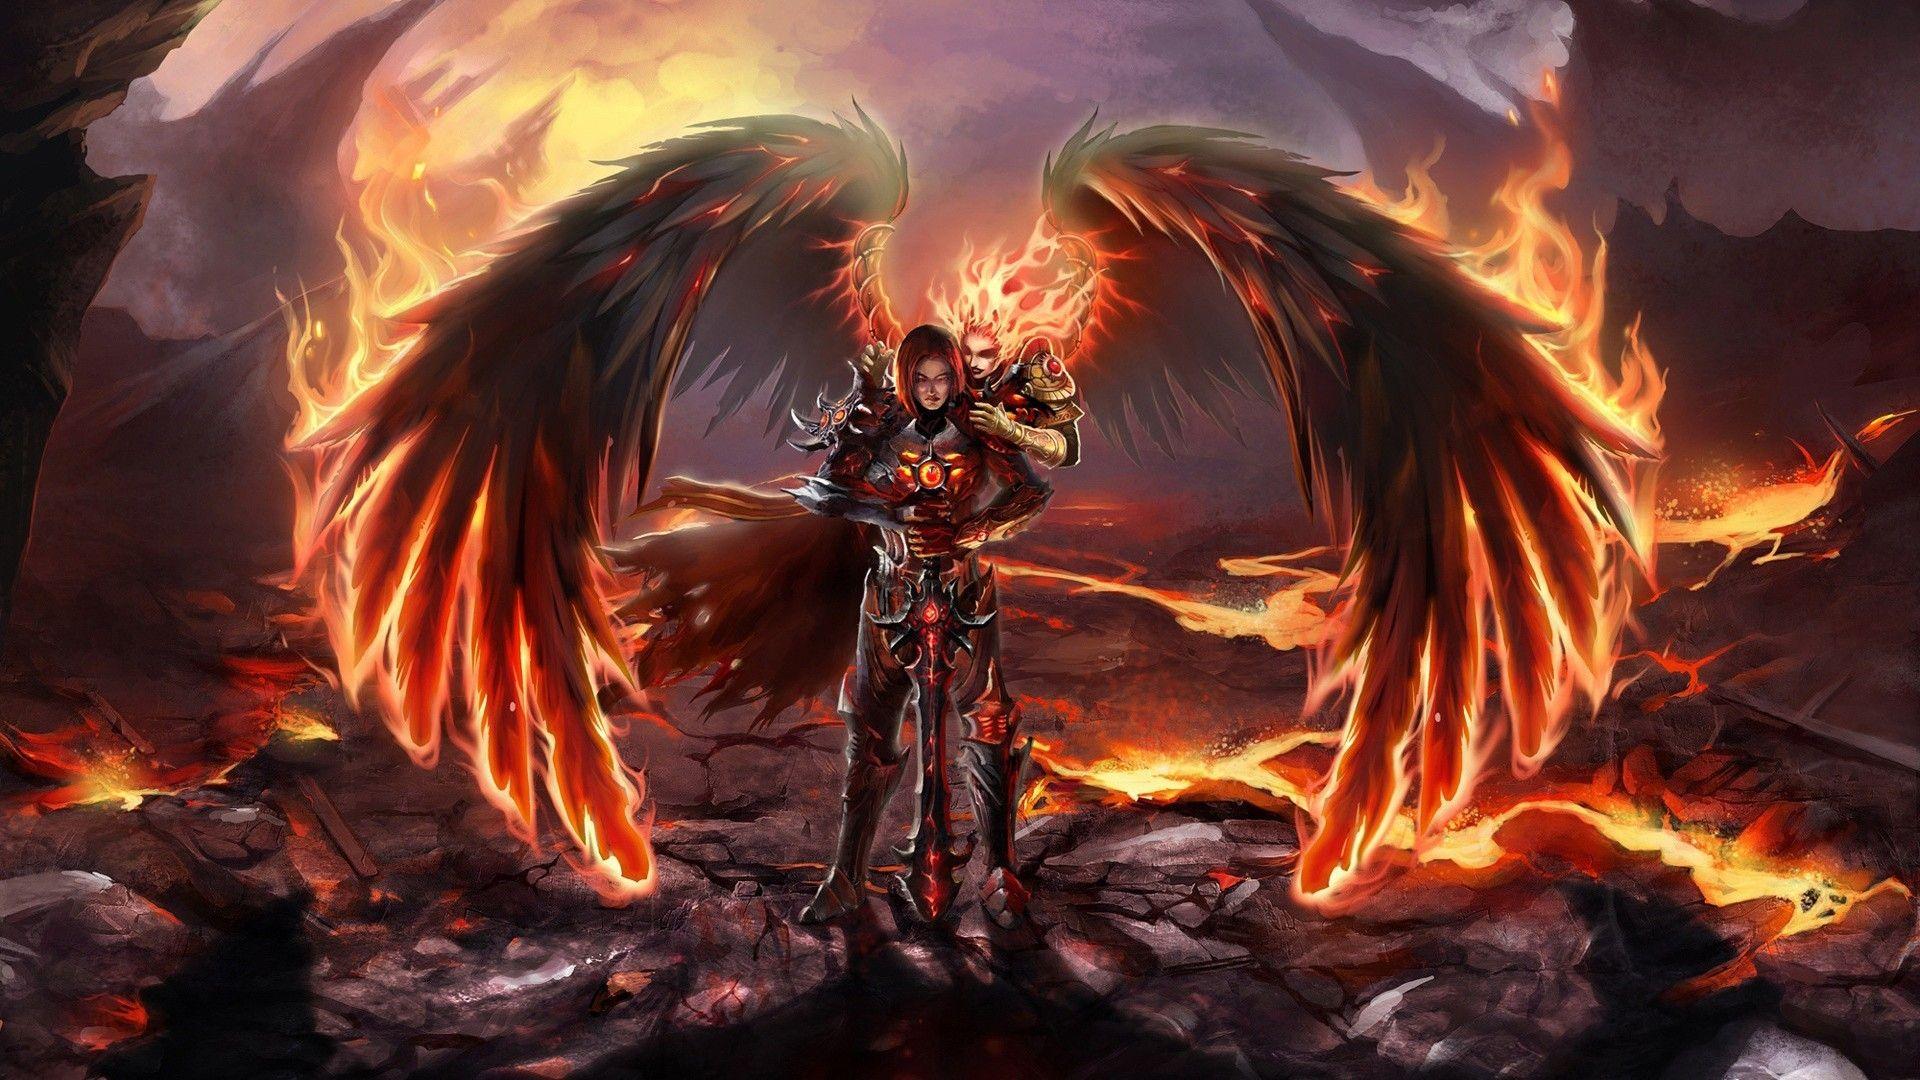 video games, wings, knights, fire, heroes, fantasy art, magic